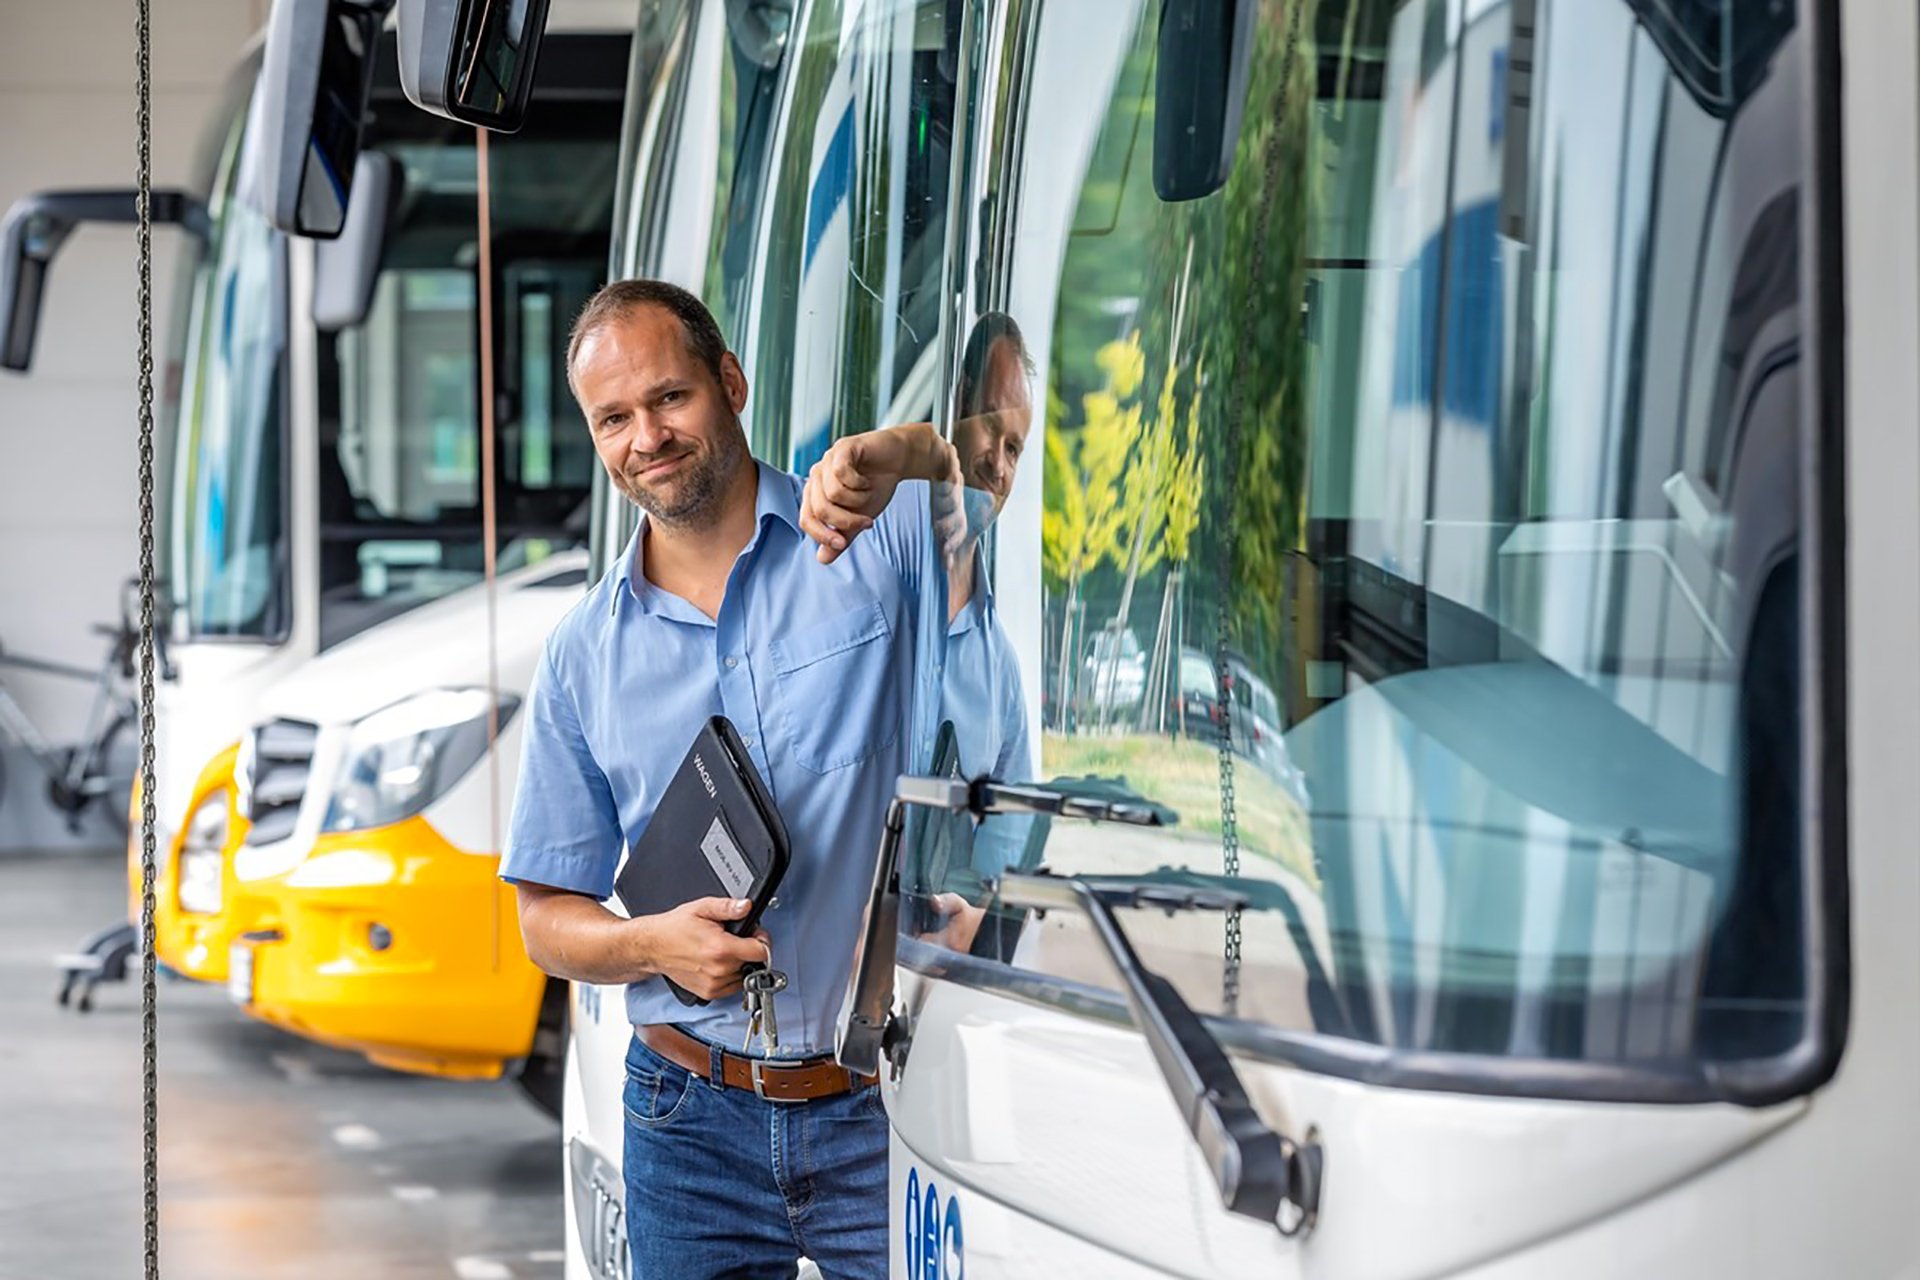 man leaning on a white and yellow bus in a blue shirt and jeans with a file in his hand